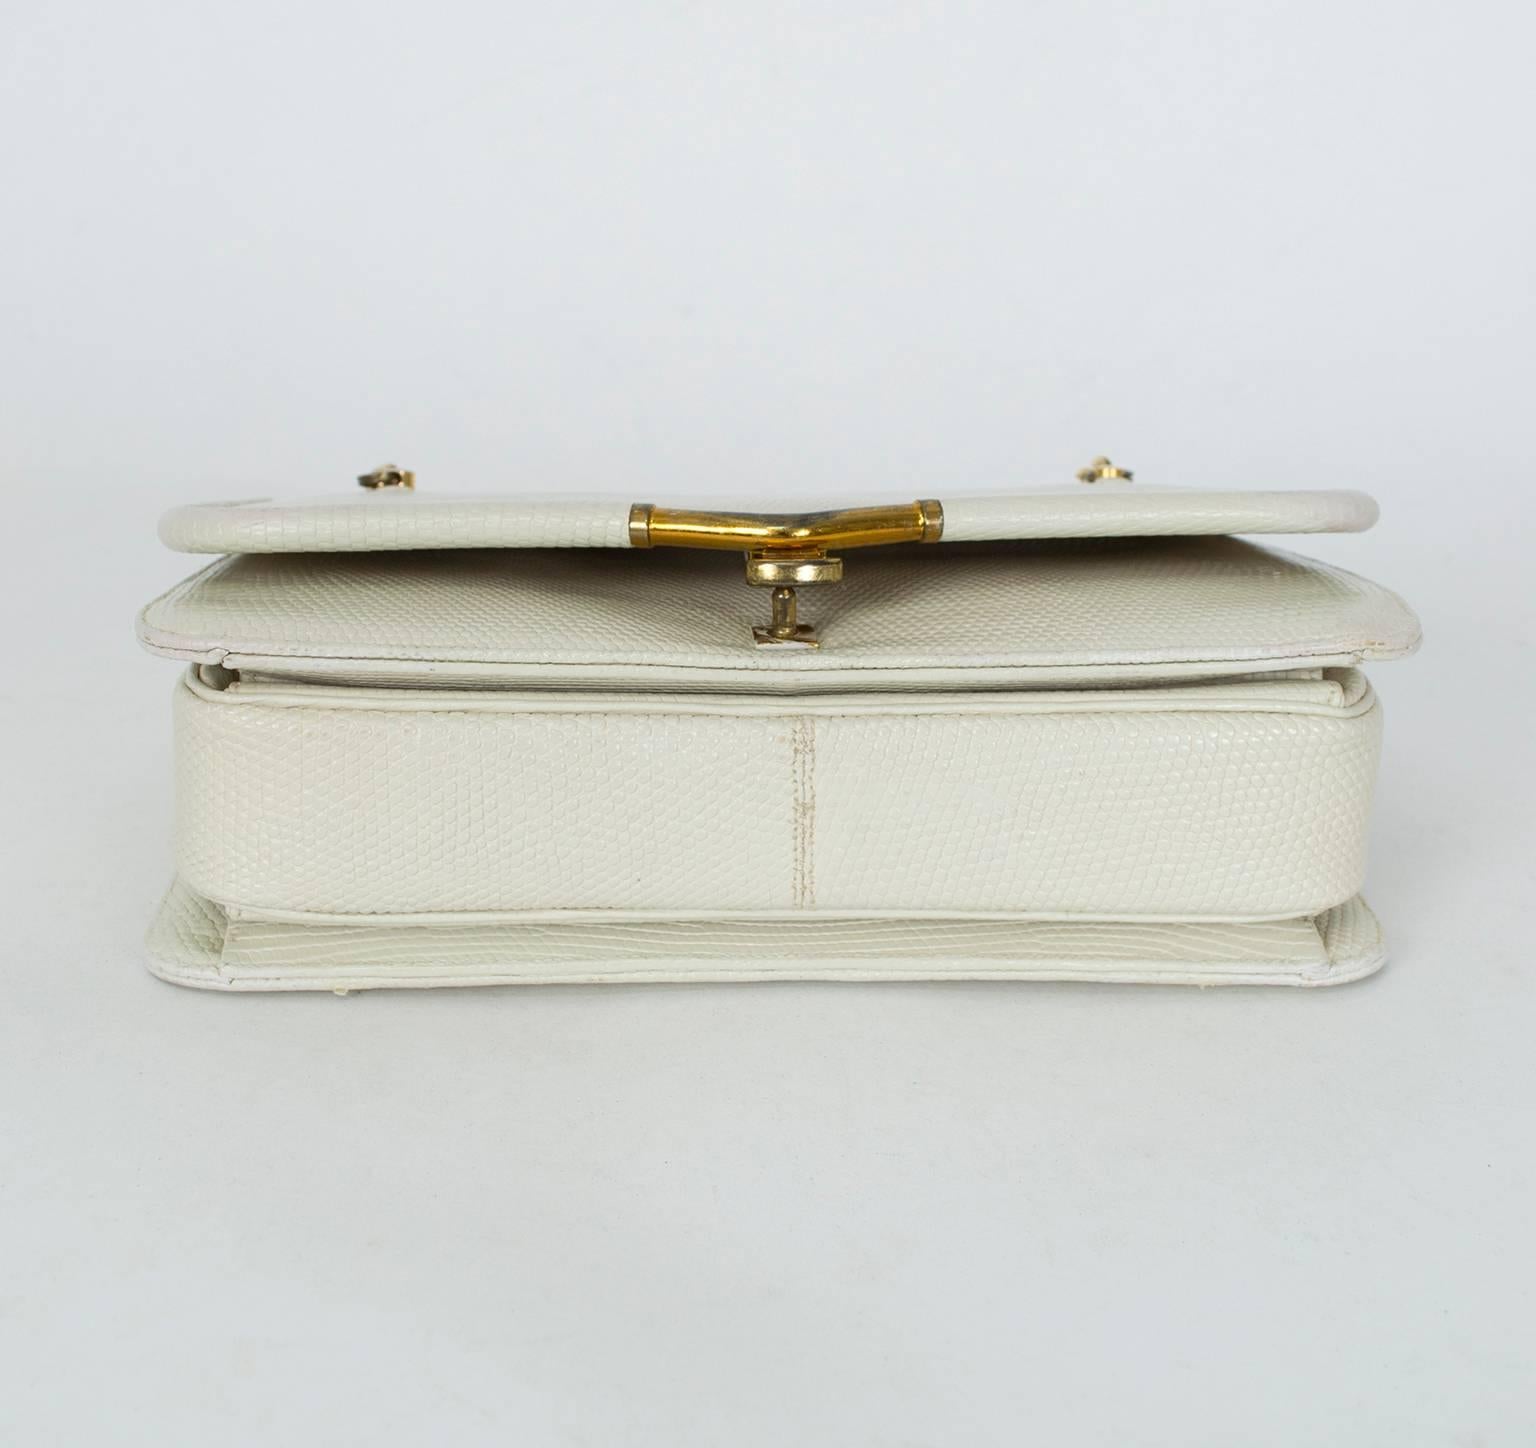 Judith Leiber Ivory Lizard Compartment Purse with Gold Chain Handles, 1980s In Good Condition For Sale In Tucson, AZ